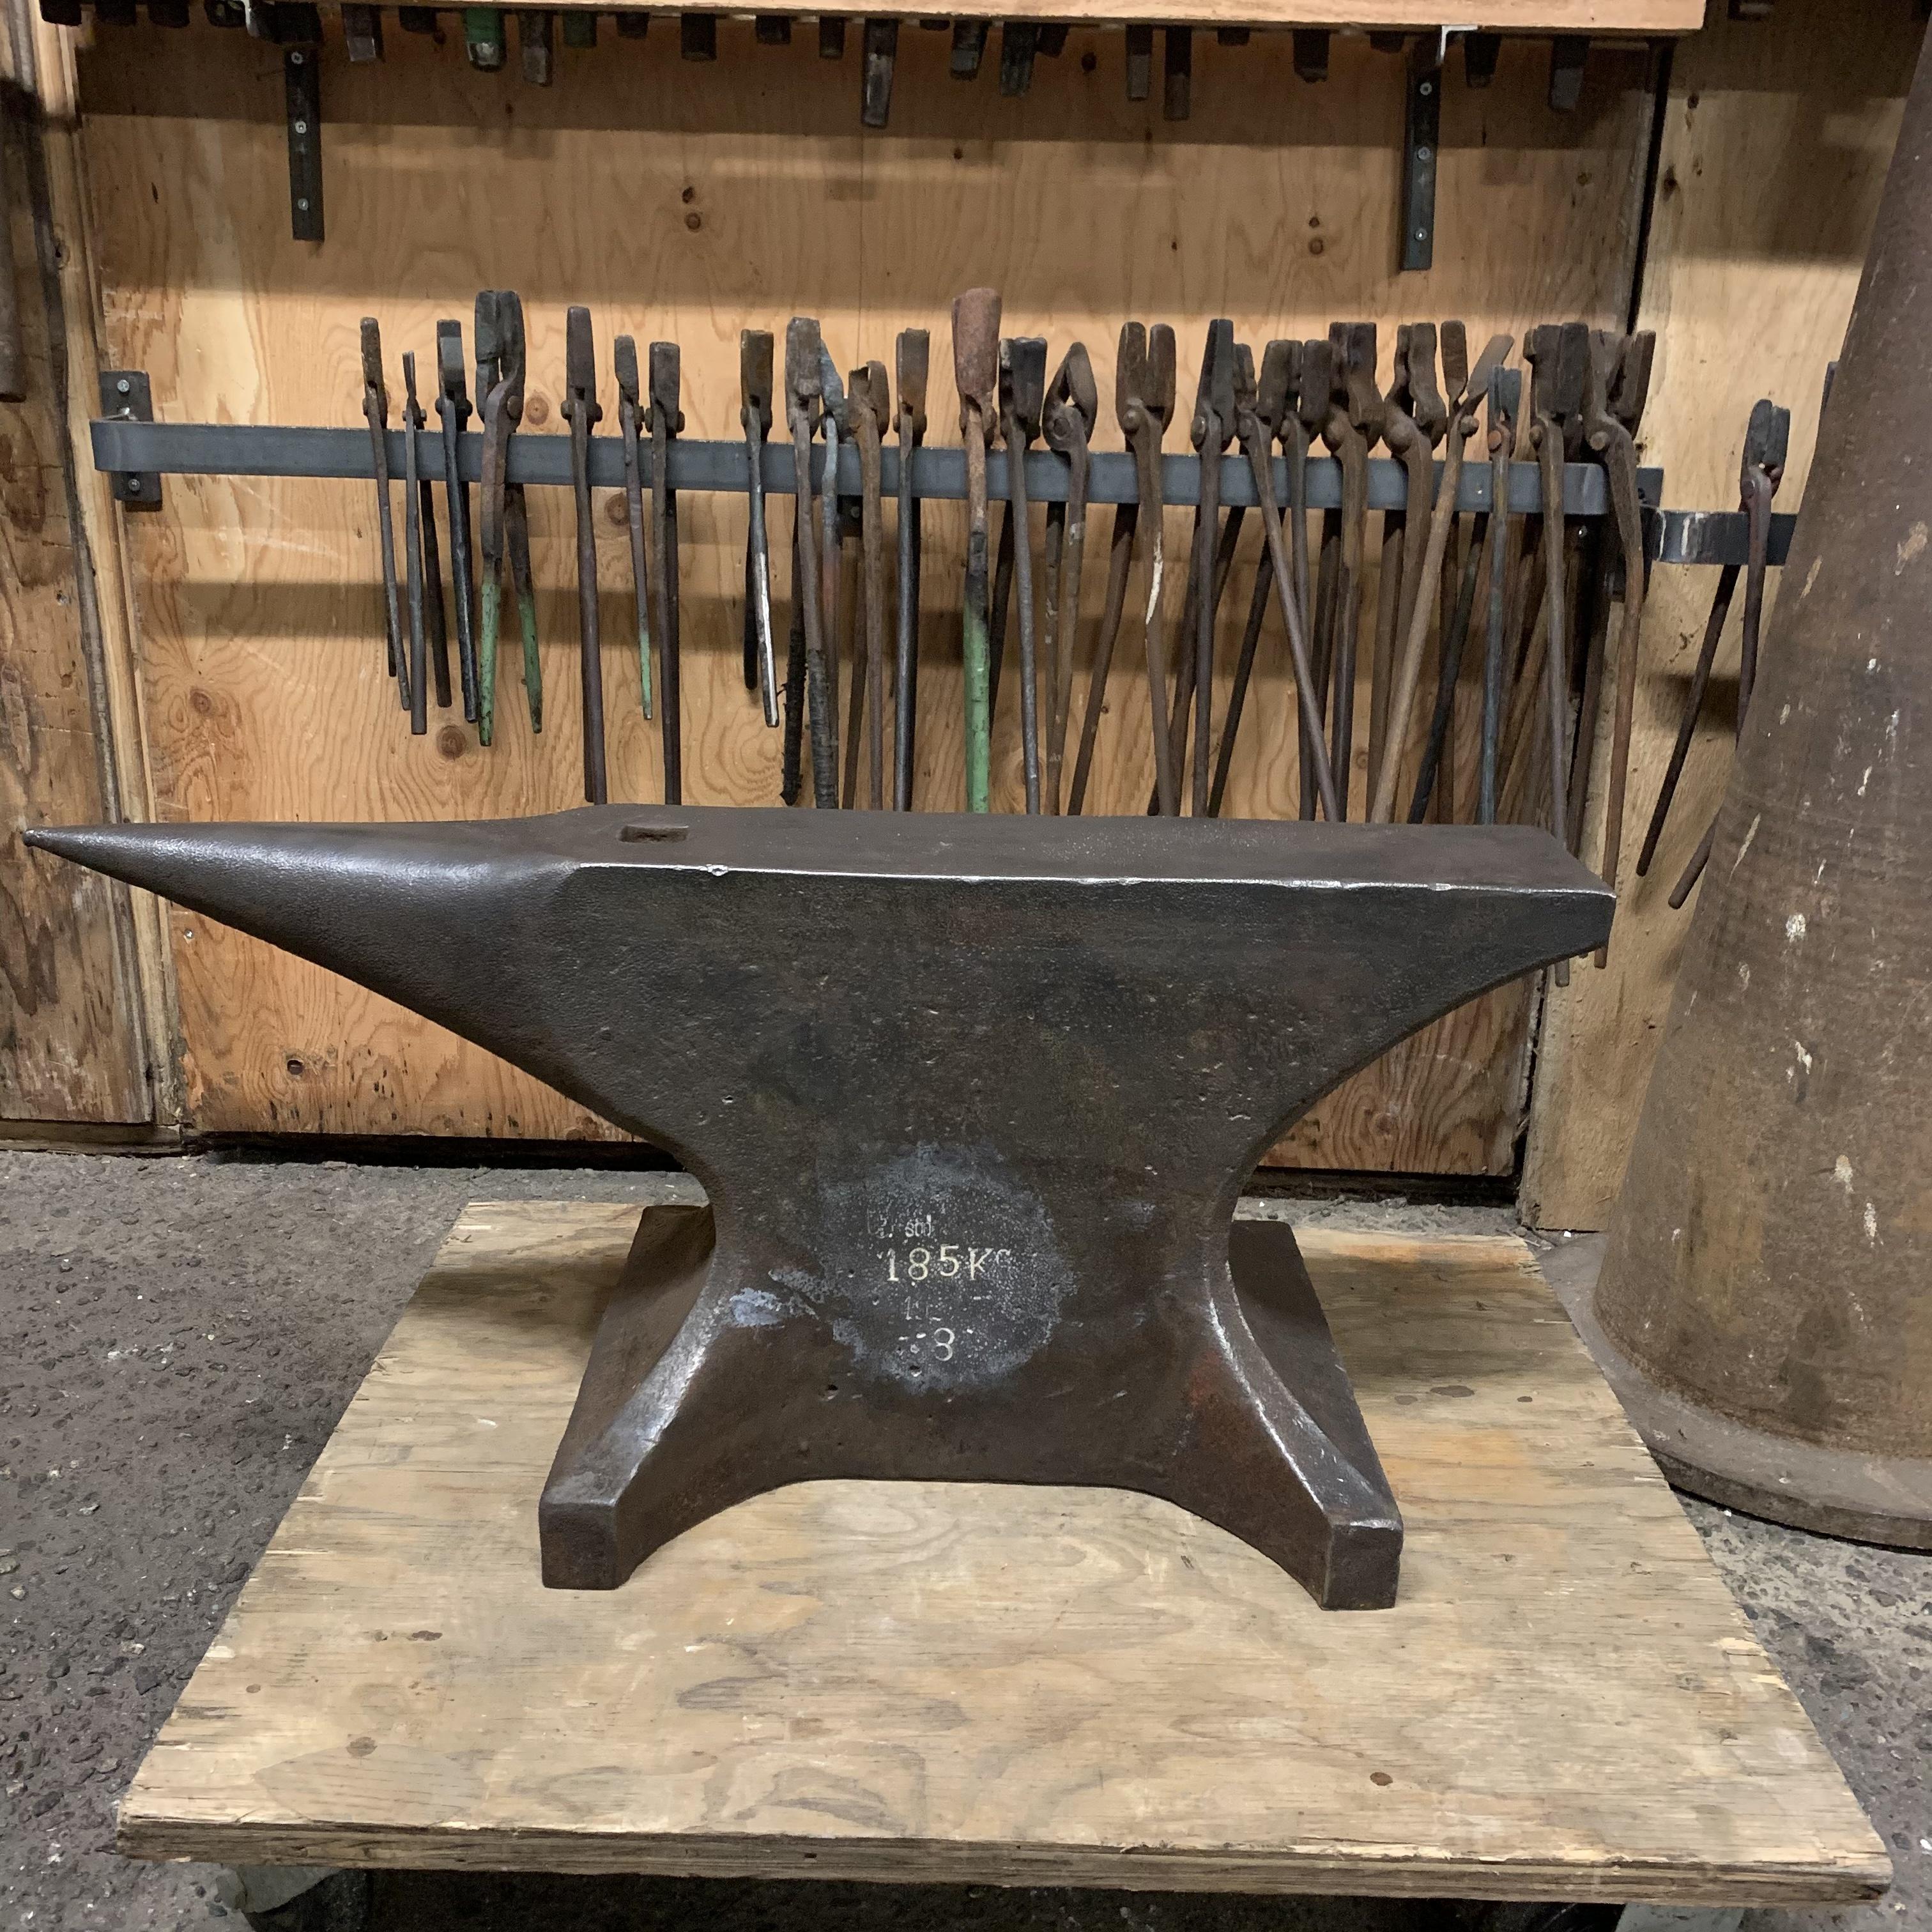 Strange small anvil - Anvil Reviews by brand - I Forge Iron